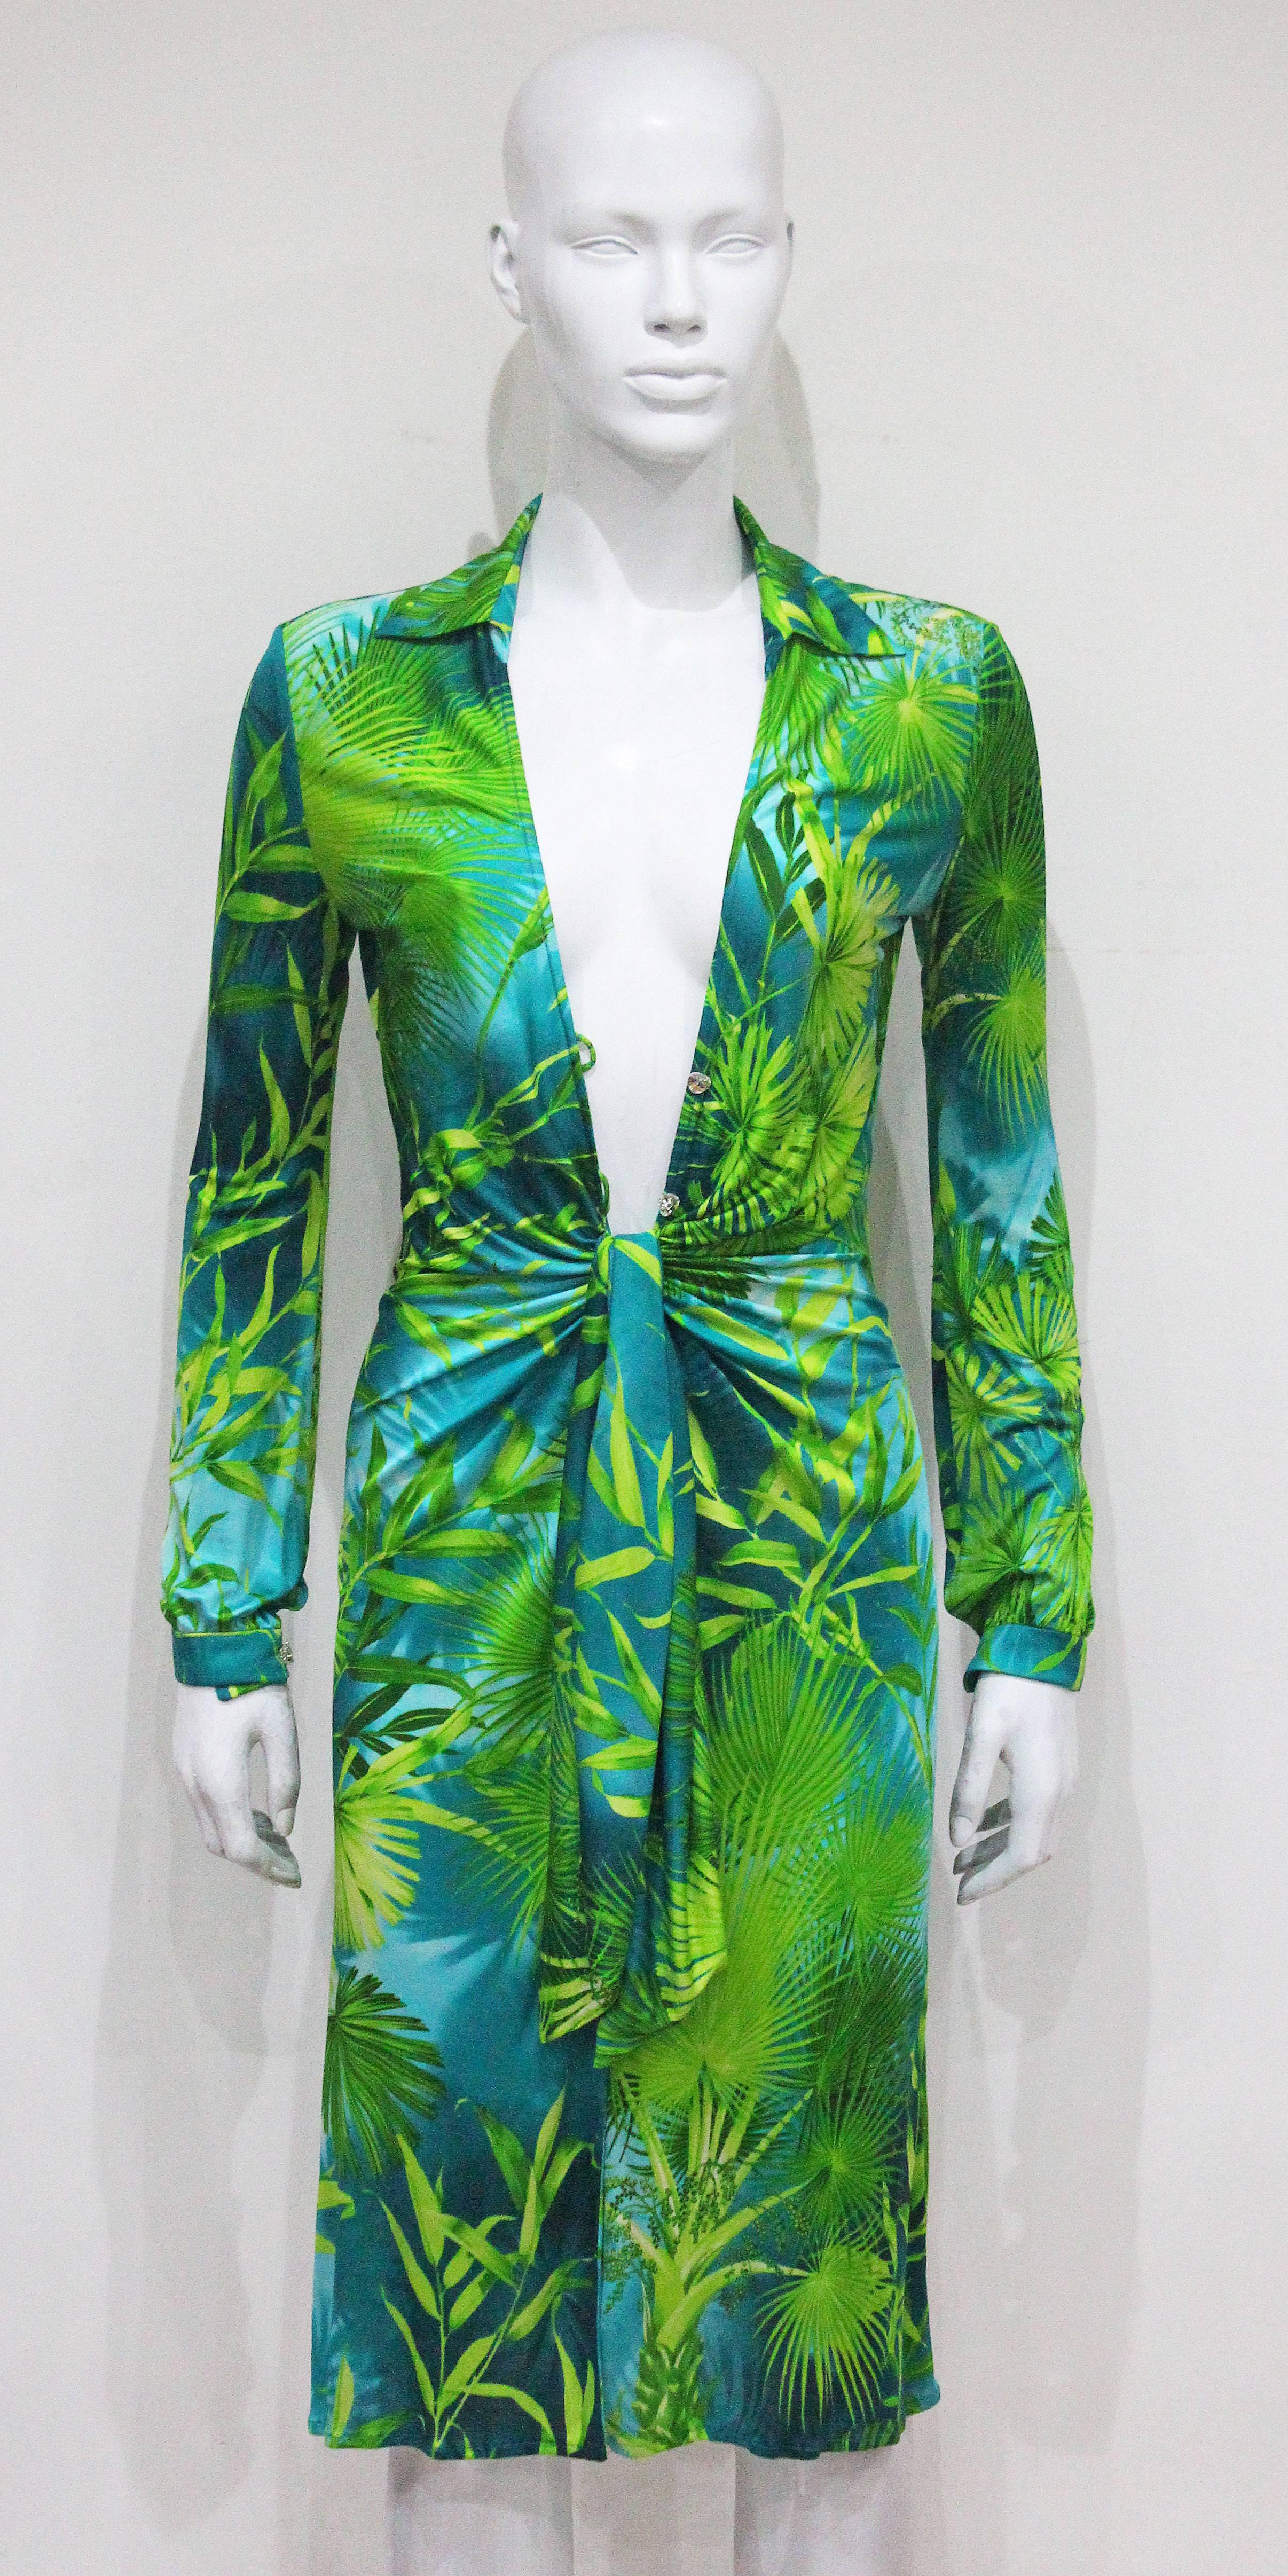 An important piece of Versace history the Gianni Versace jungle print super low plunge silk jersey dress from the Spring/Summer 2000 runway collection as worn by Versace muse Amber Valletta. The dress is 100% silk jersey and features the infamous